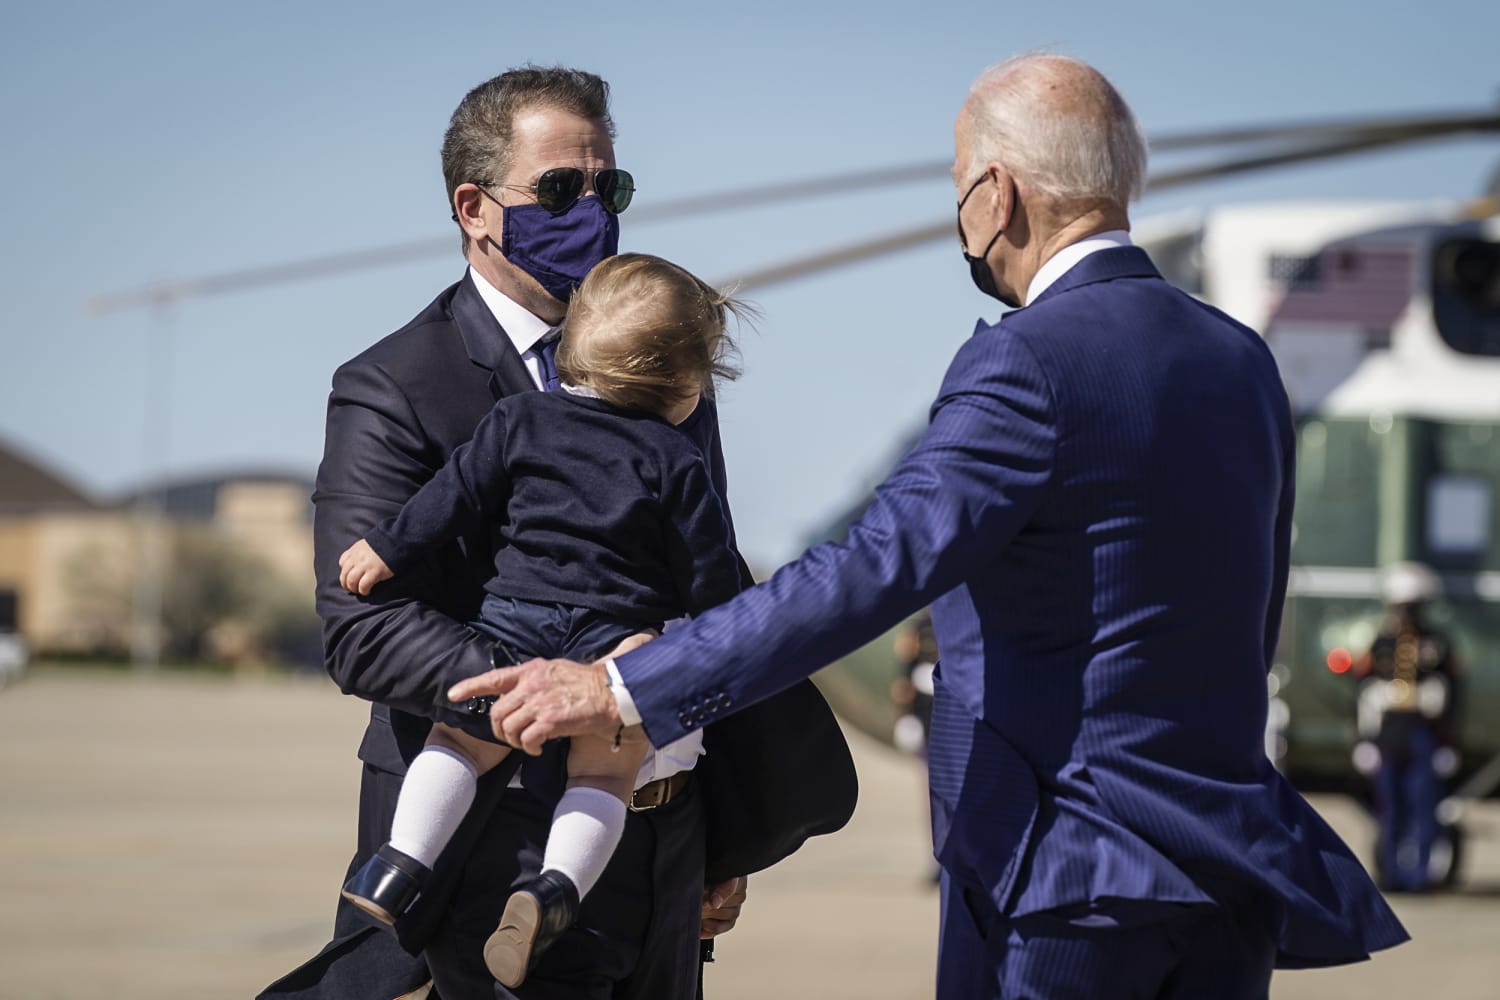 Analysis Hunter Biden's hard drive shows he and his firm took about from 2013 to 2018